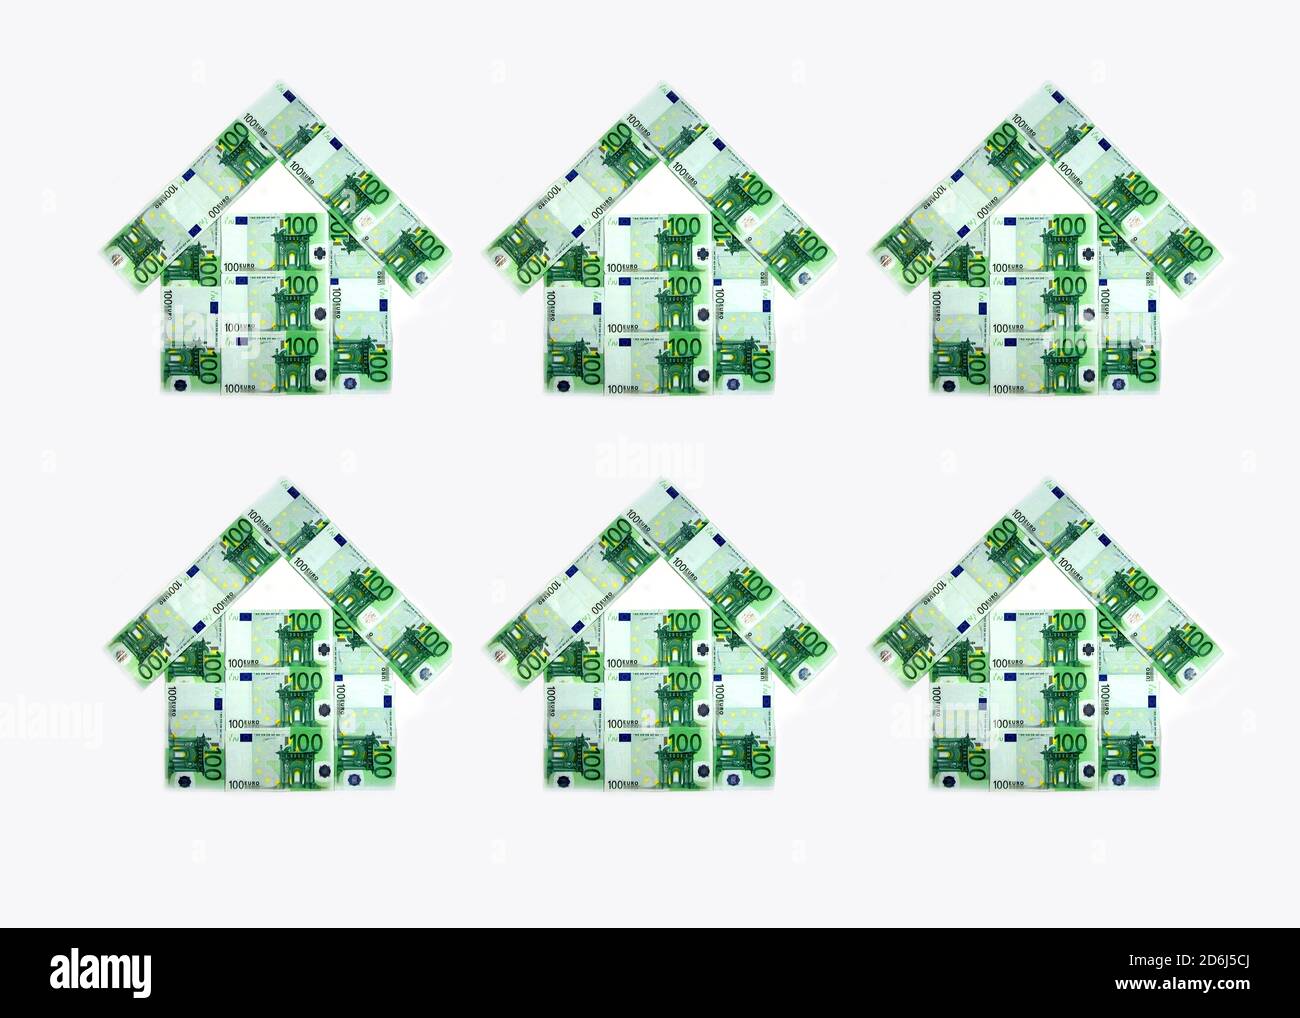 Real estate, real estate boom, expensive, investment, symbolic image, assembly Stock Photo